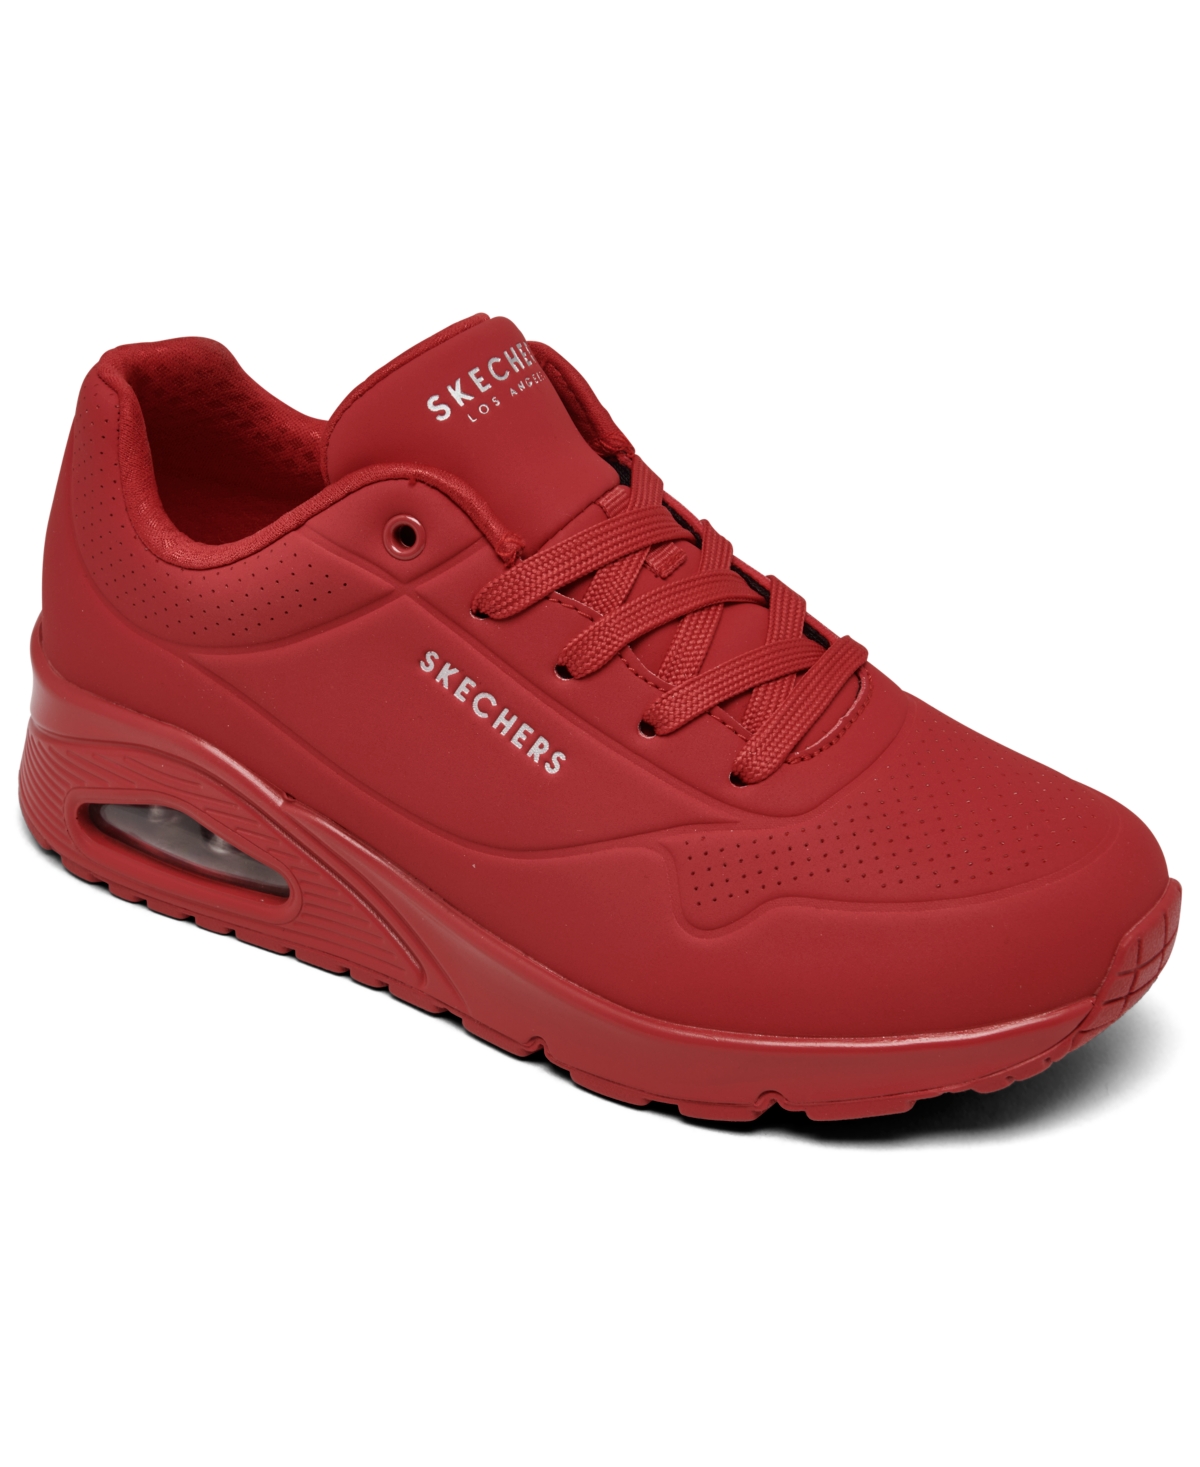 Street Women's Uno - Stand on Air Casual Sneakers from Finish Line - Red